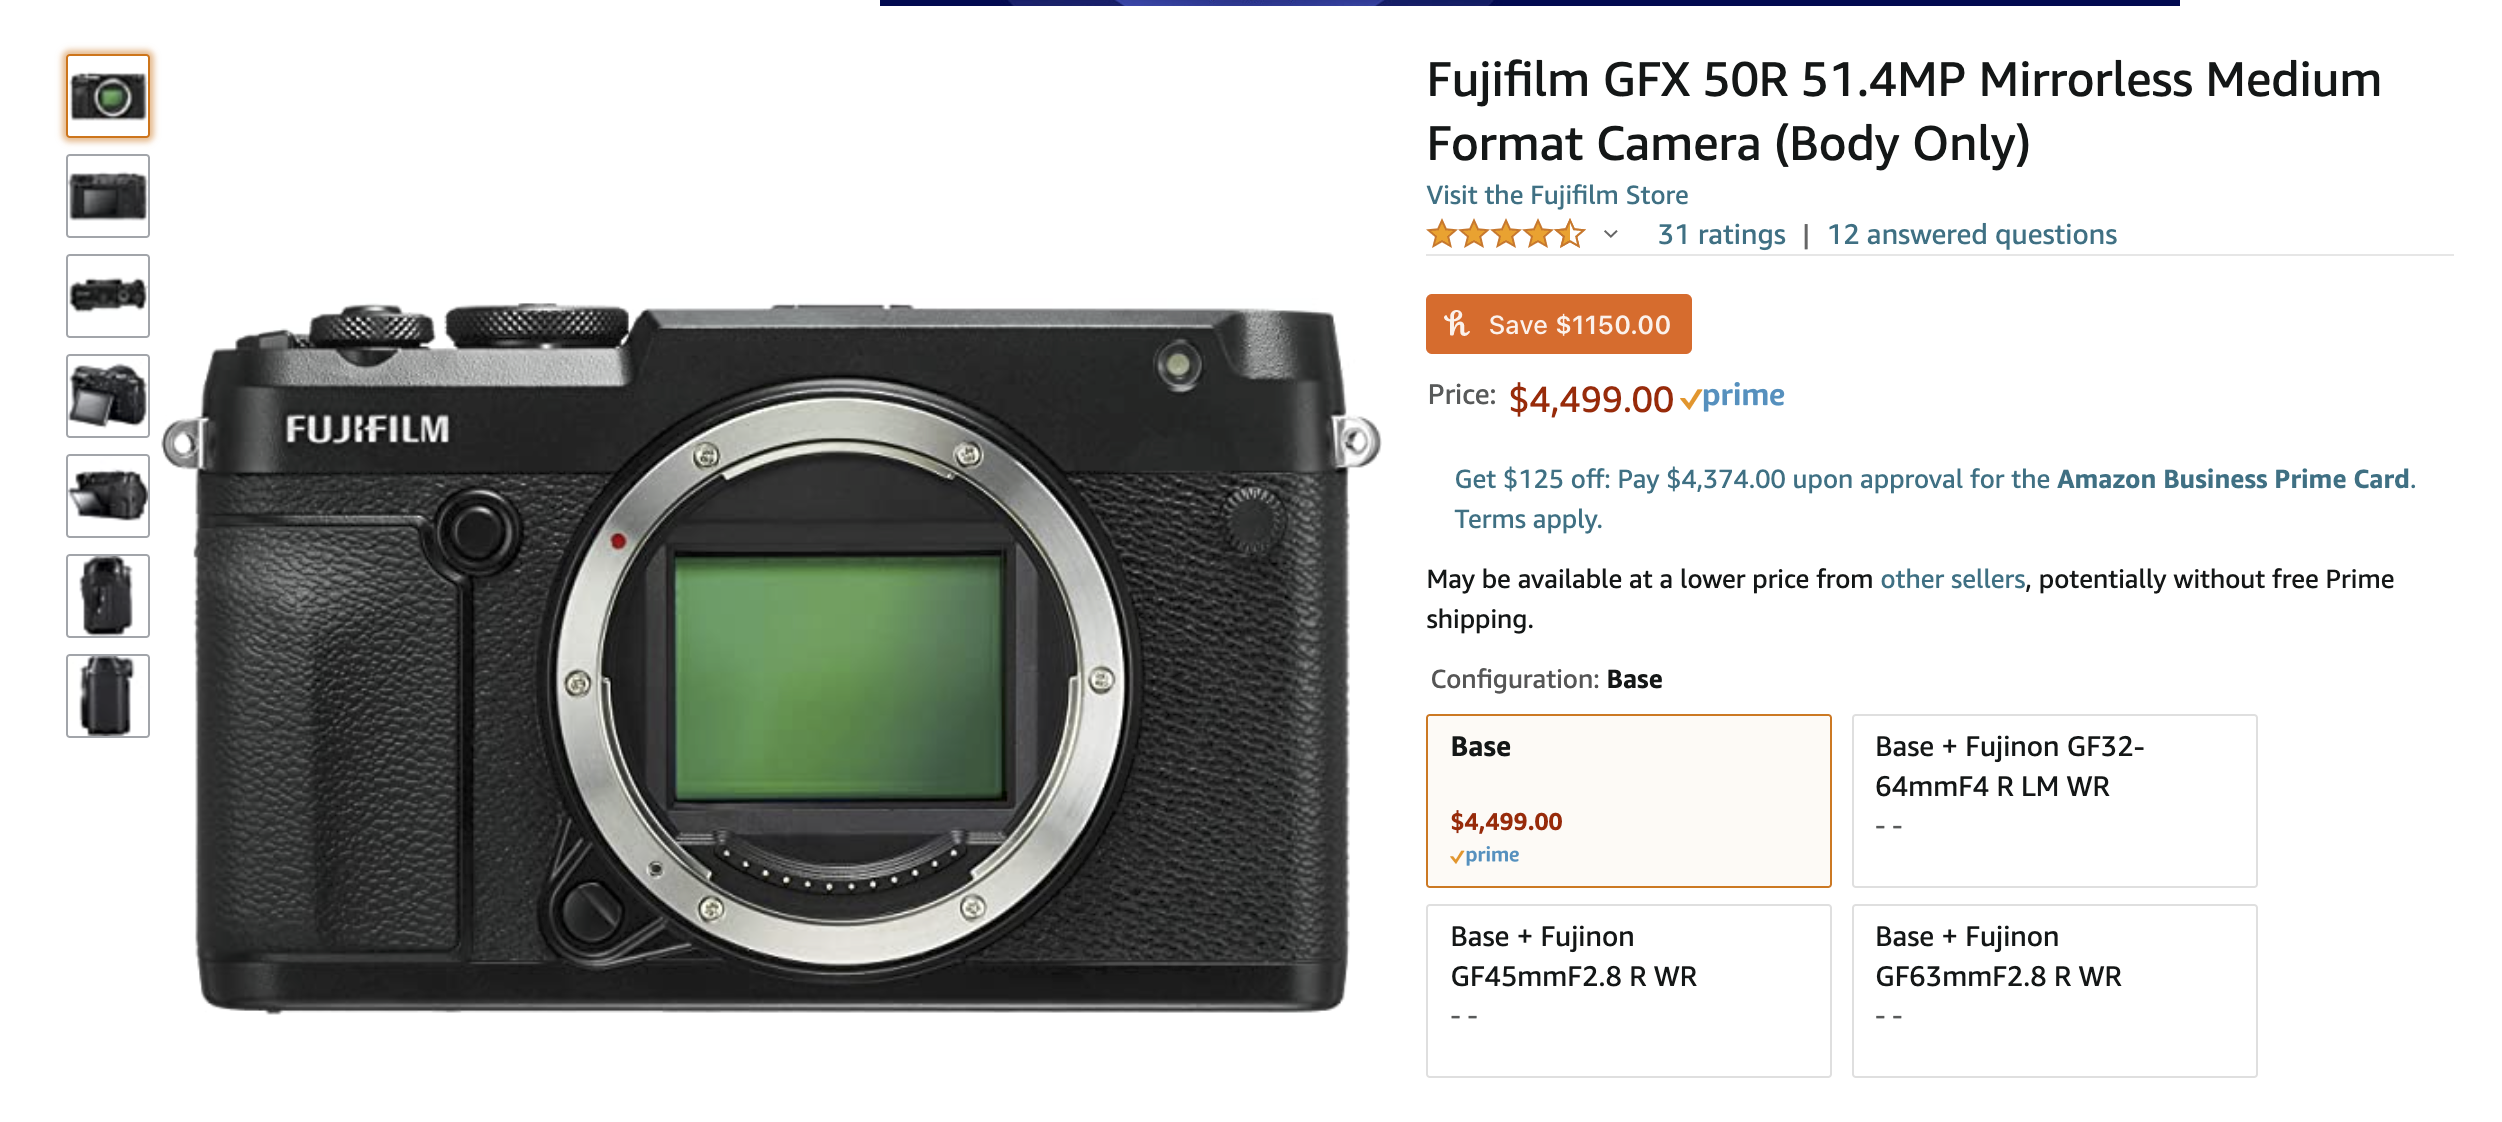 How to Get the Fujifilm GFX 50R for $1,000 Less. Hurry!